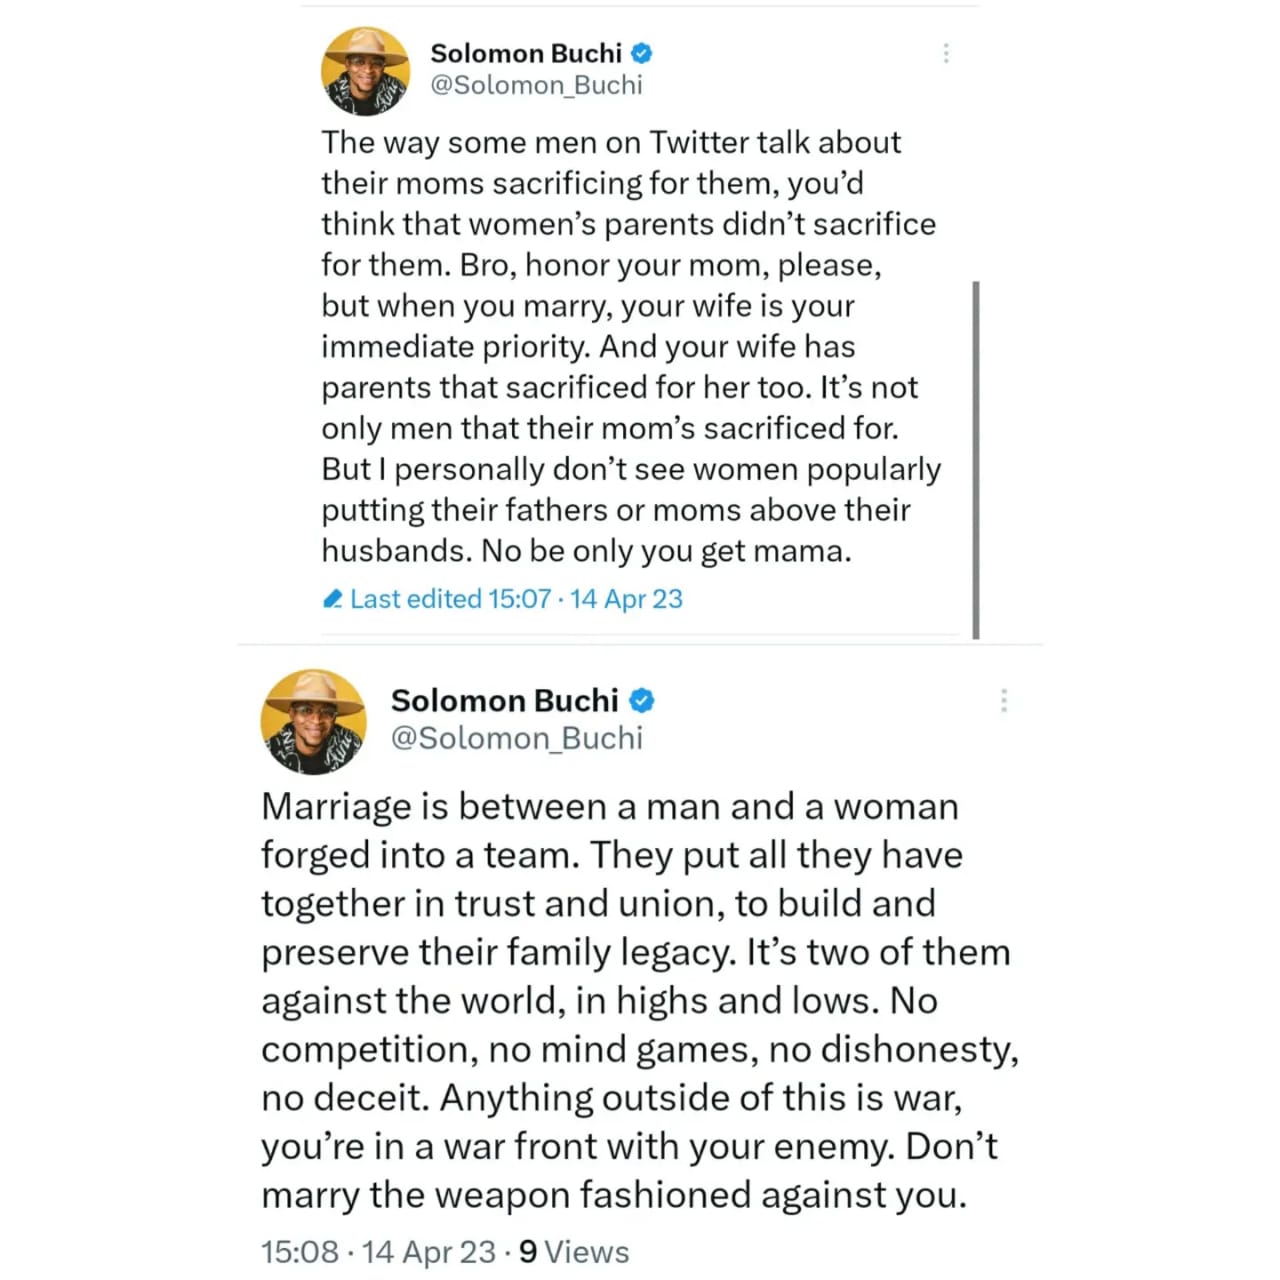 Hakimi: The devil is really fighting overtime to bastardize marriage - Life coach, Solomon Buchi, writes as he insists a man